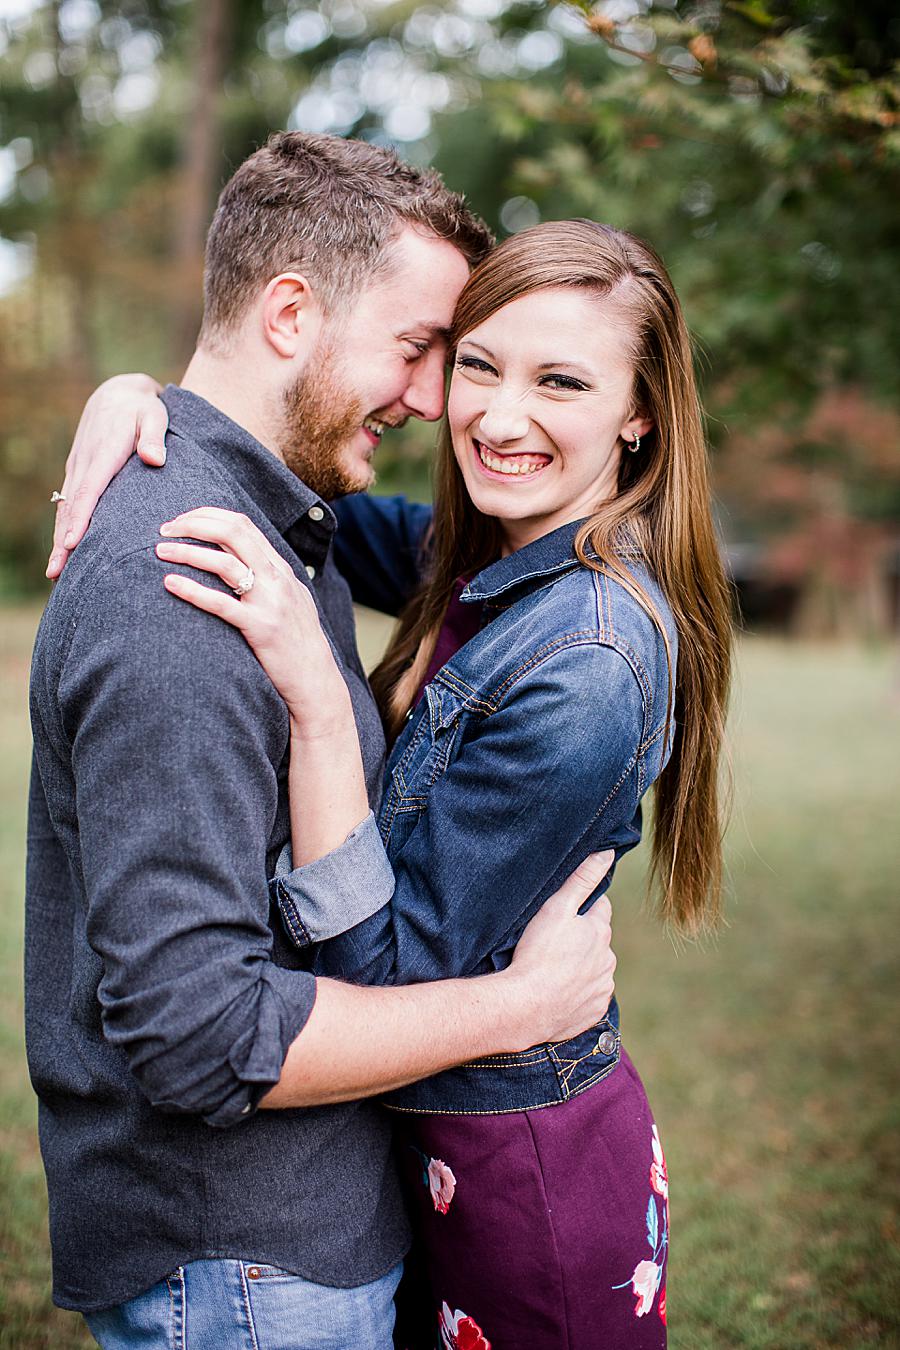 Forehead to temple at this AMP Cookout by Knoxville Wedding Photographer, Amanda May Photos.